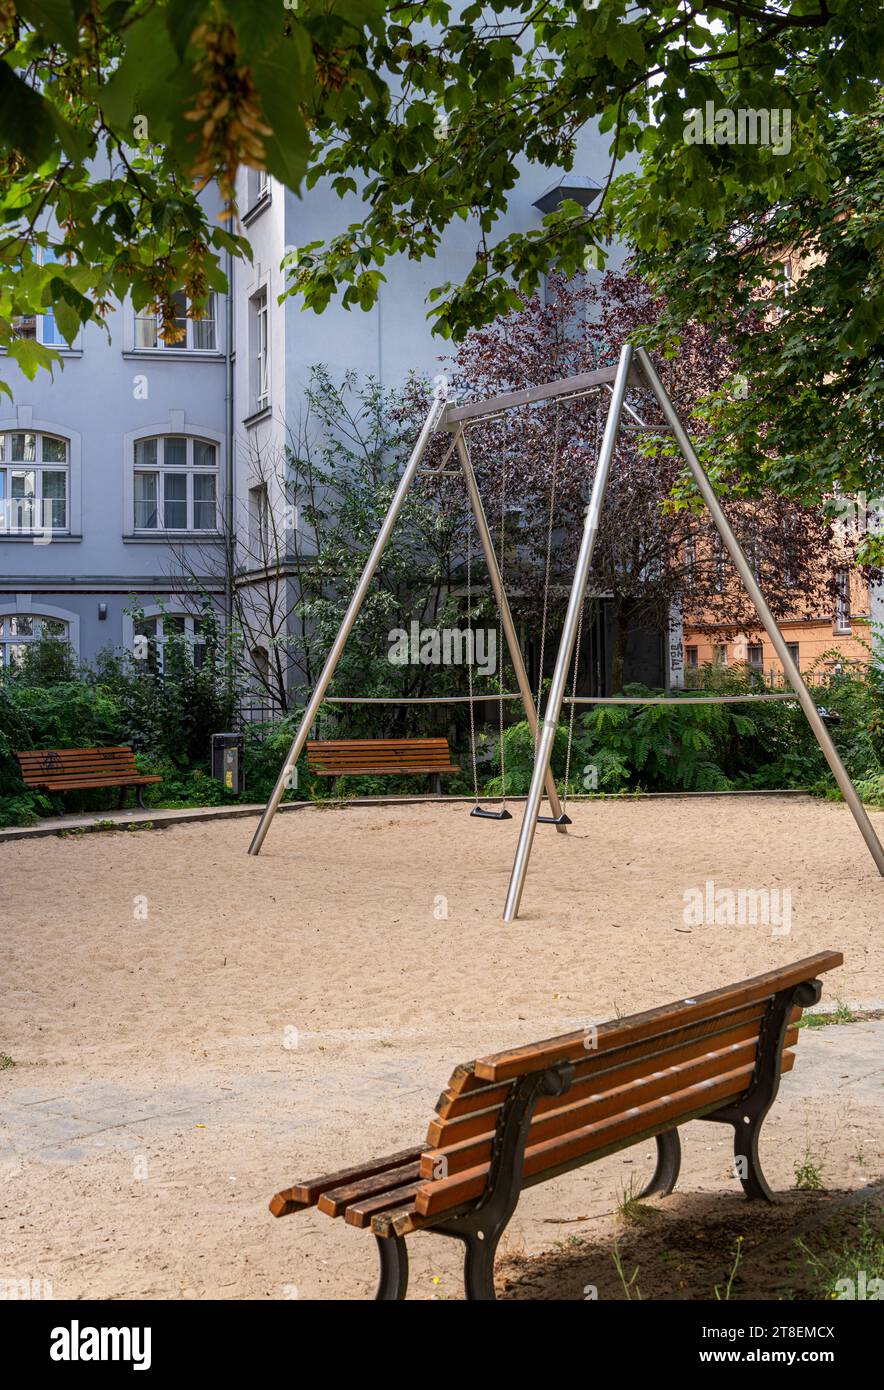 Children's Play Palace In A Typical Berlin Backyard, Auguststraße, Berlin, Germany Stock Photo